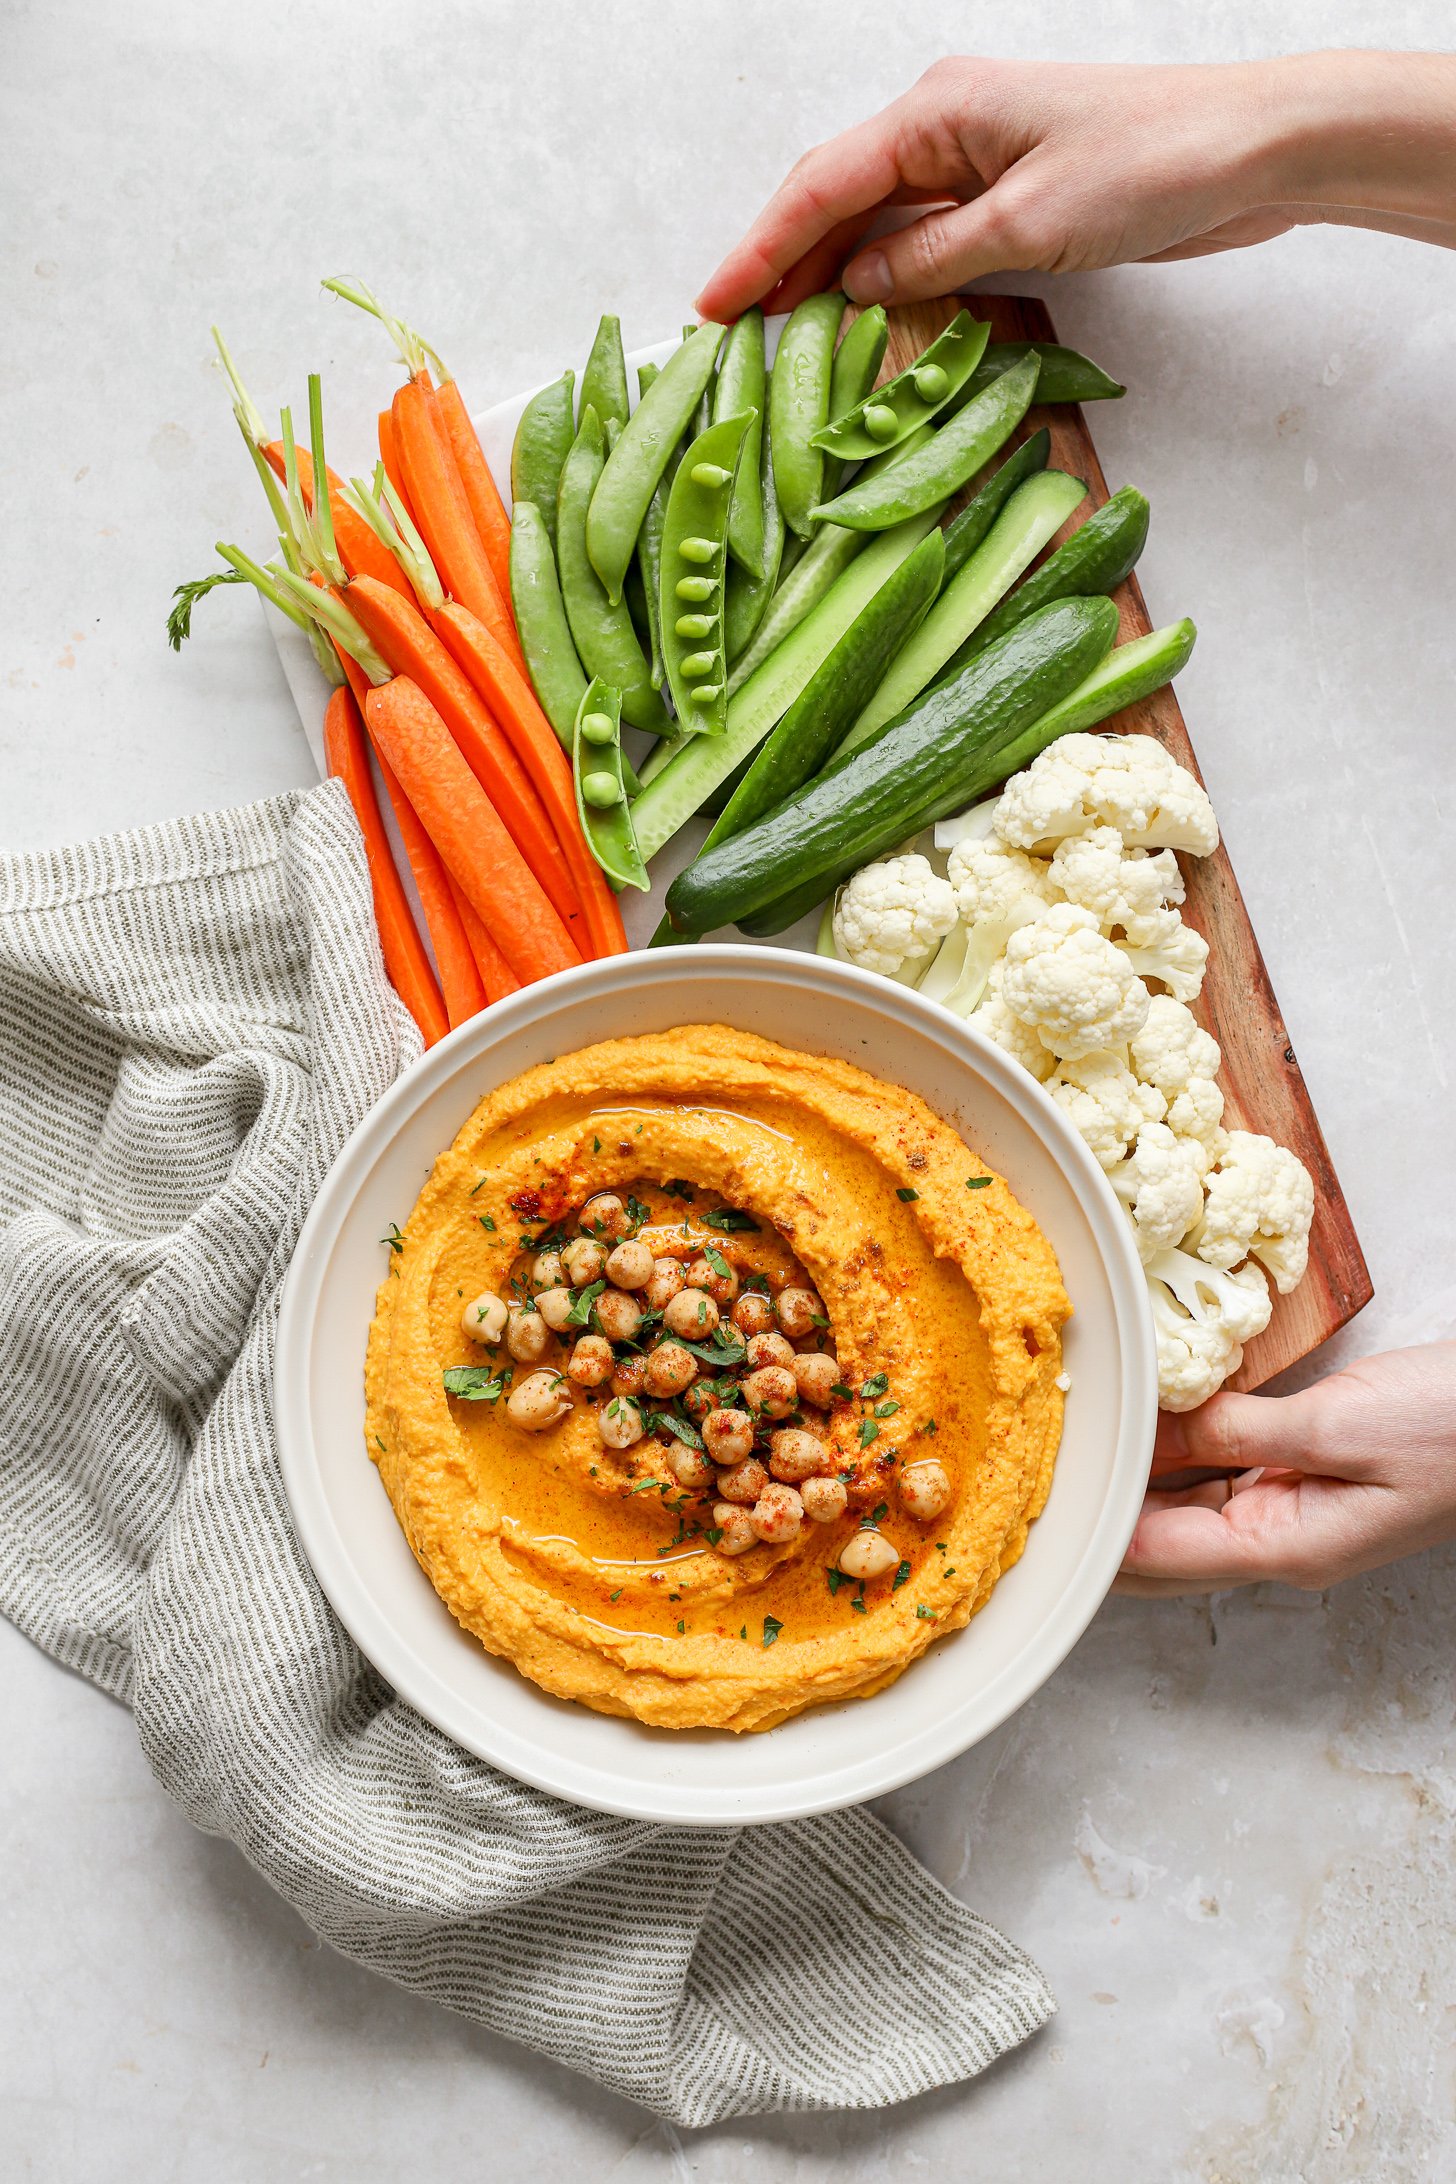 Roasted carrot hummus on a veggie board with carrot, snap peas, sliced cucumbers, and cauliflower florets. The hummus is topped with whole chickpeas and fresh herbs. There is a striped napkin next to the board and two hands holding the board.  